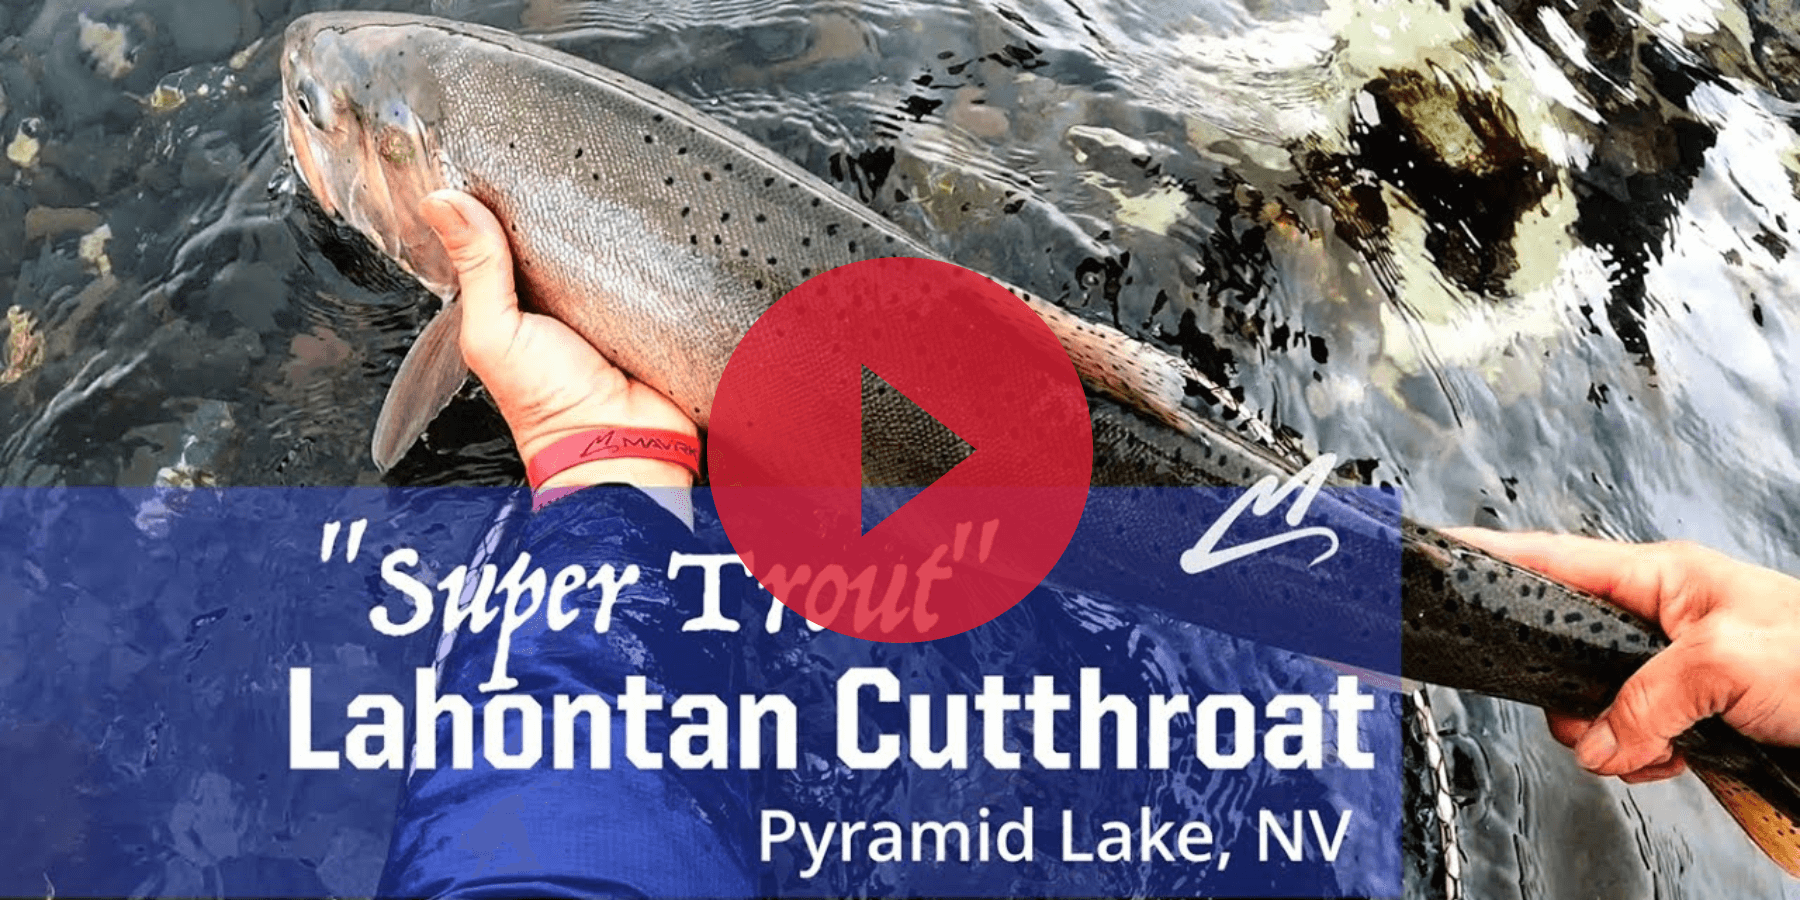 A Lahontan Cutthroat Trout full catch on a streamer in Pyramid Lake, NV. This giant species of trout was extinct by 1941. Here's what happened to this prehistoric fish.